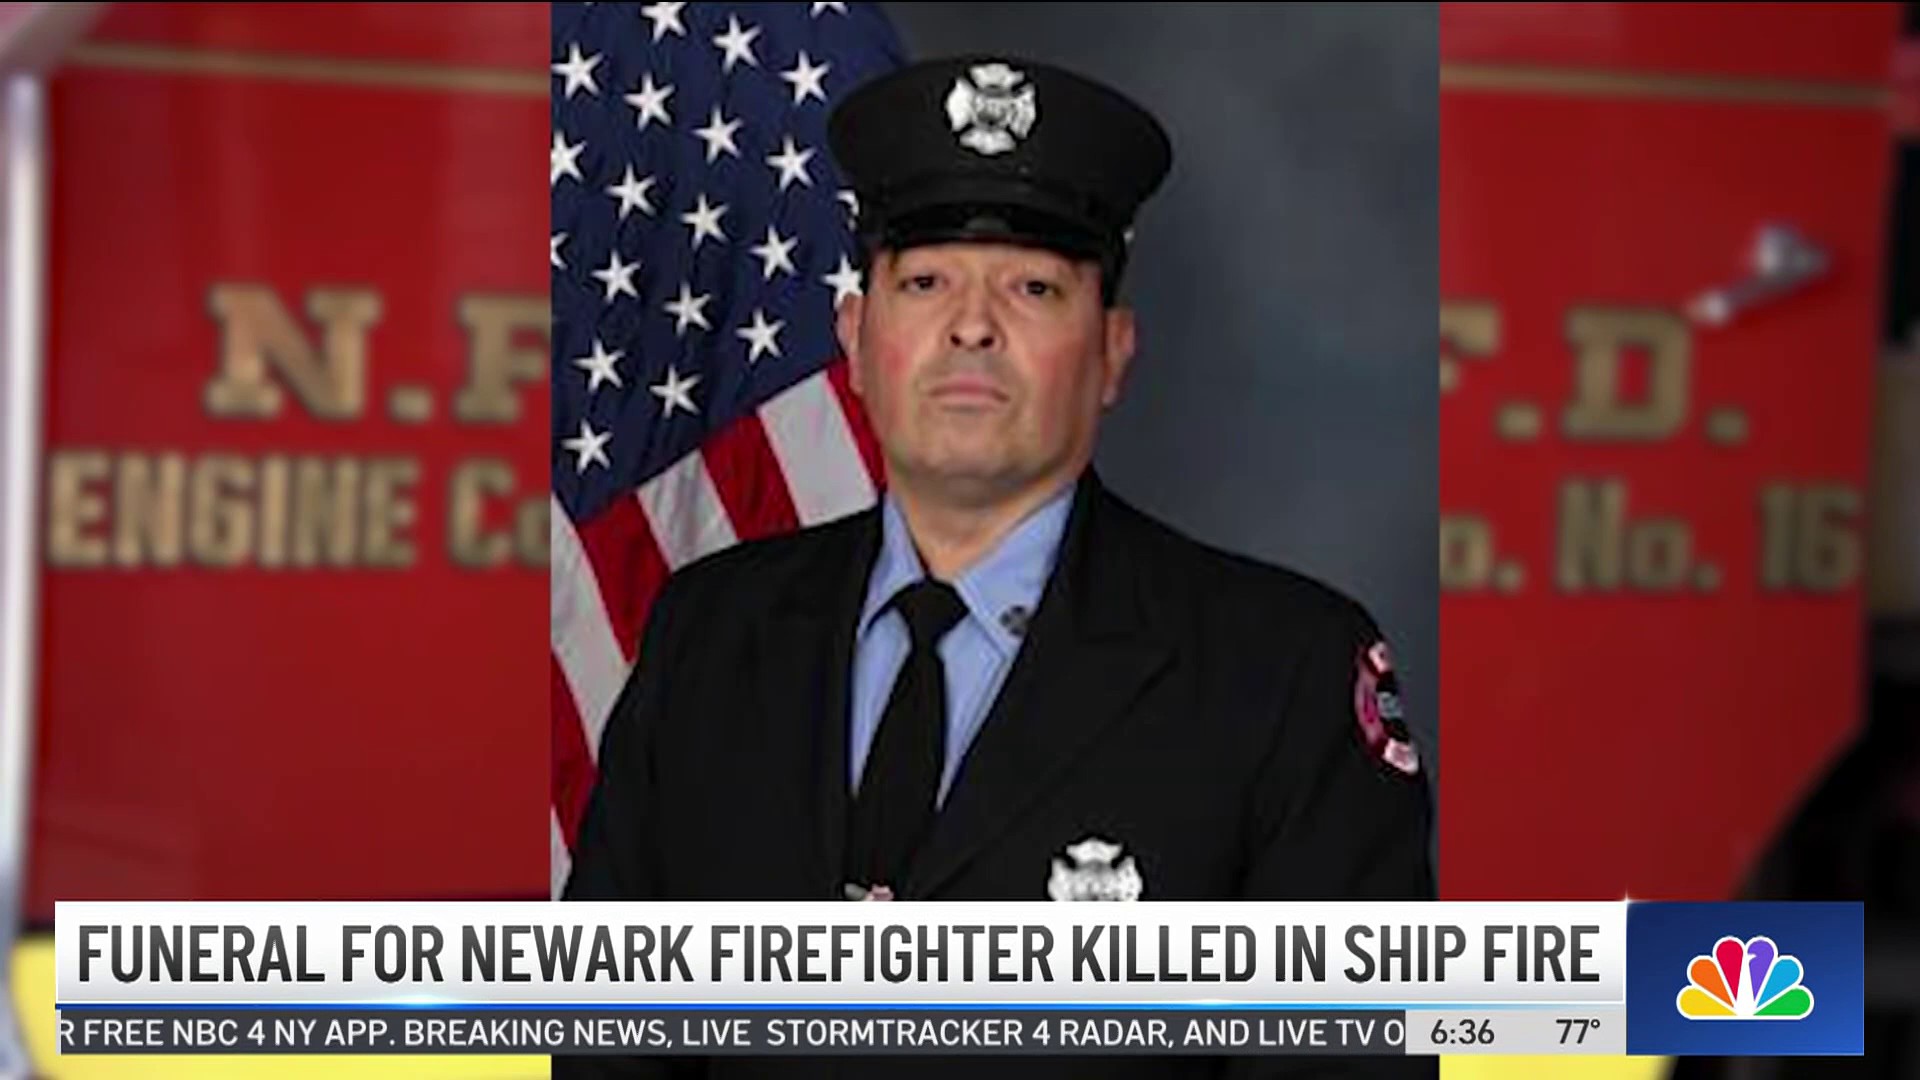 Port Newark cargo ship fire: Mourners gather for funeral of fallen  firefighter Augusto Acabou - ABC7 New York